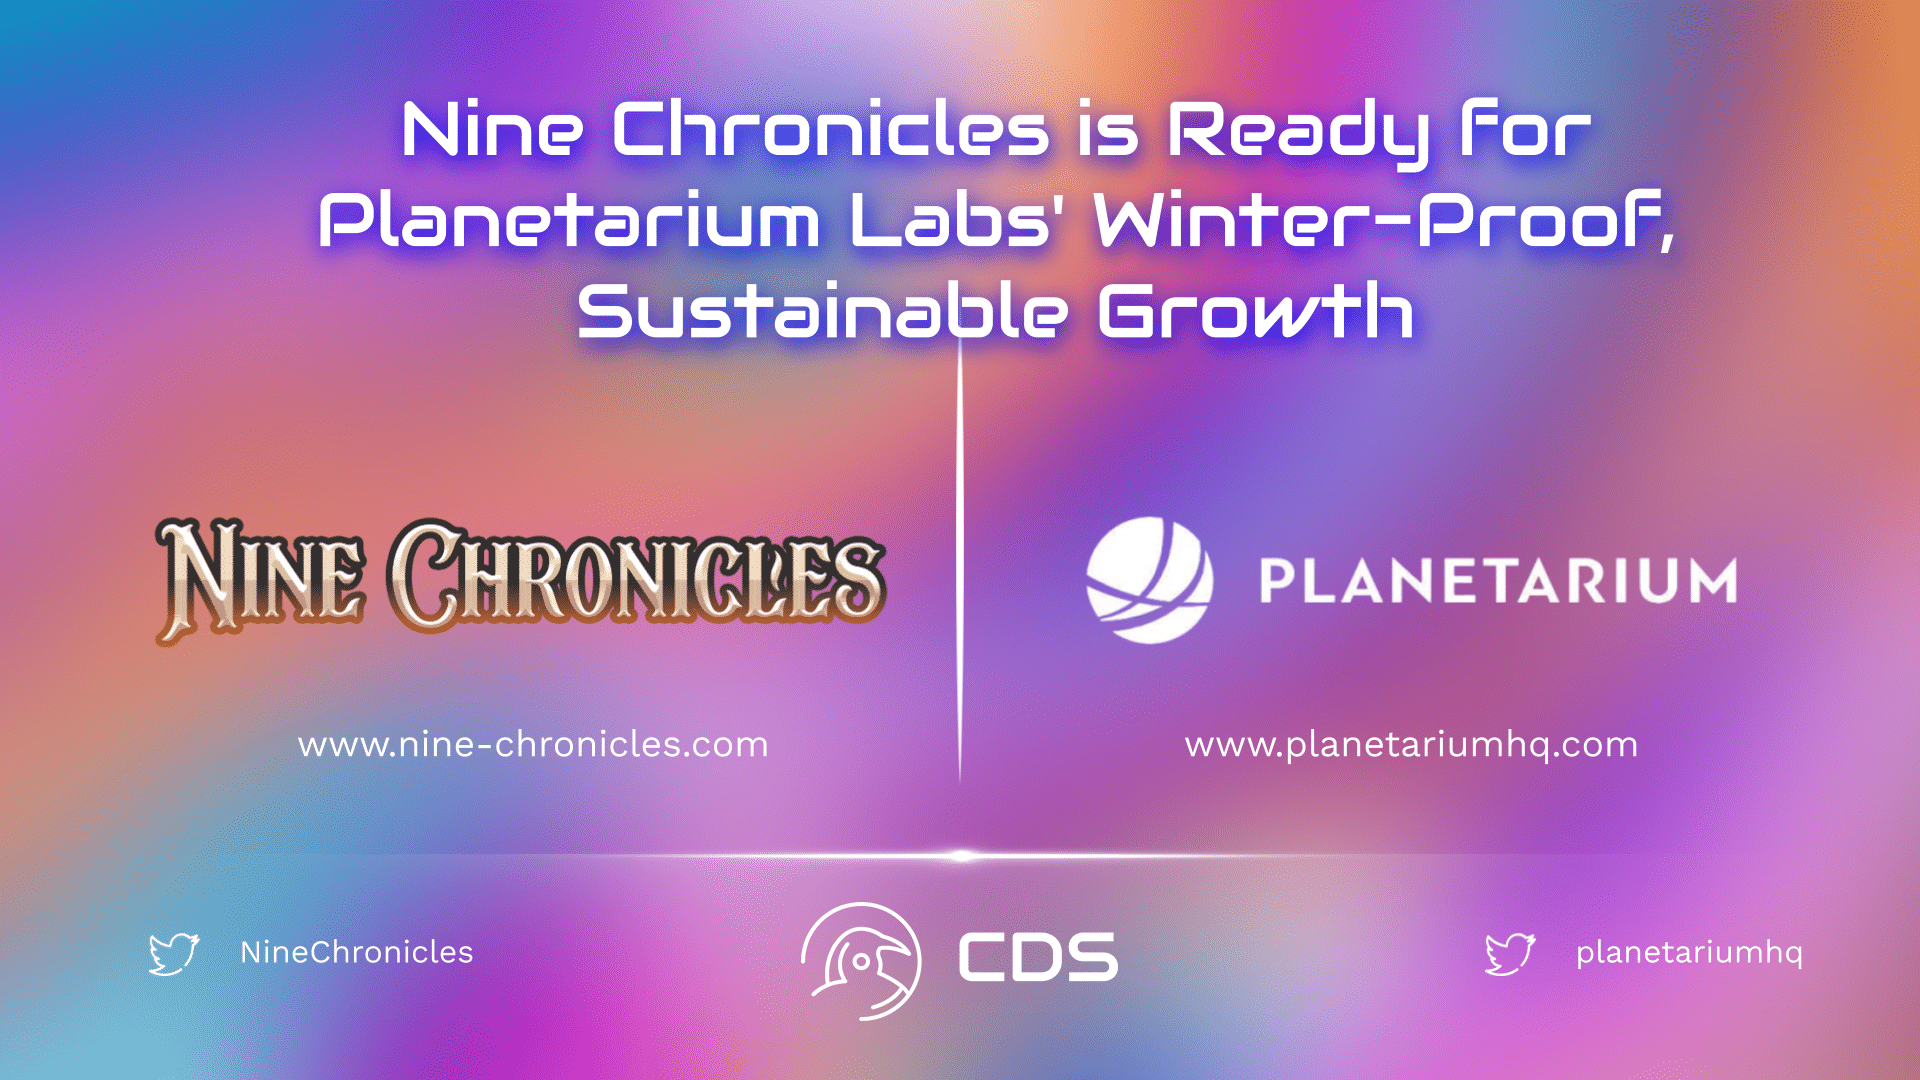 Nine Chronicles is Ready for Planetarium Labs' Winter-Proof, Sustainable Growth